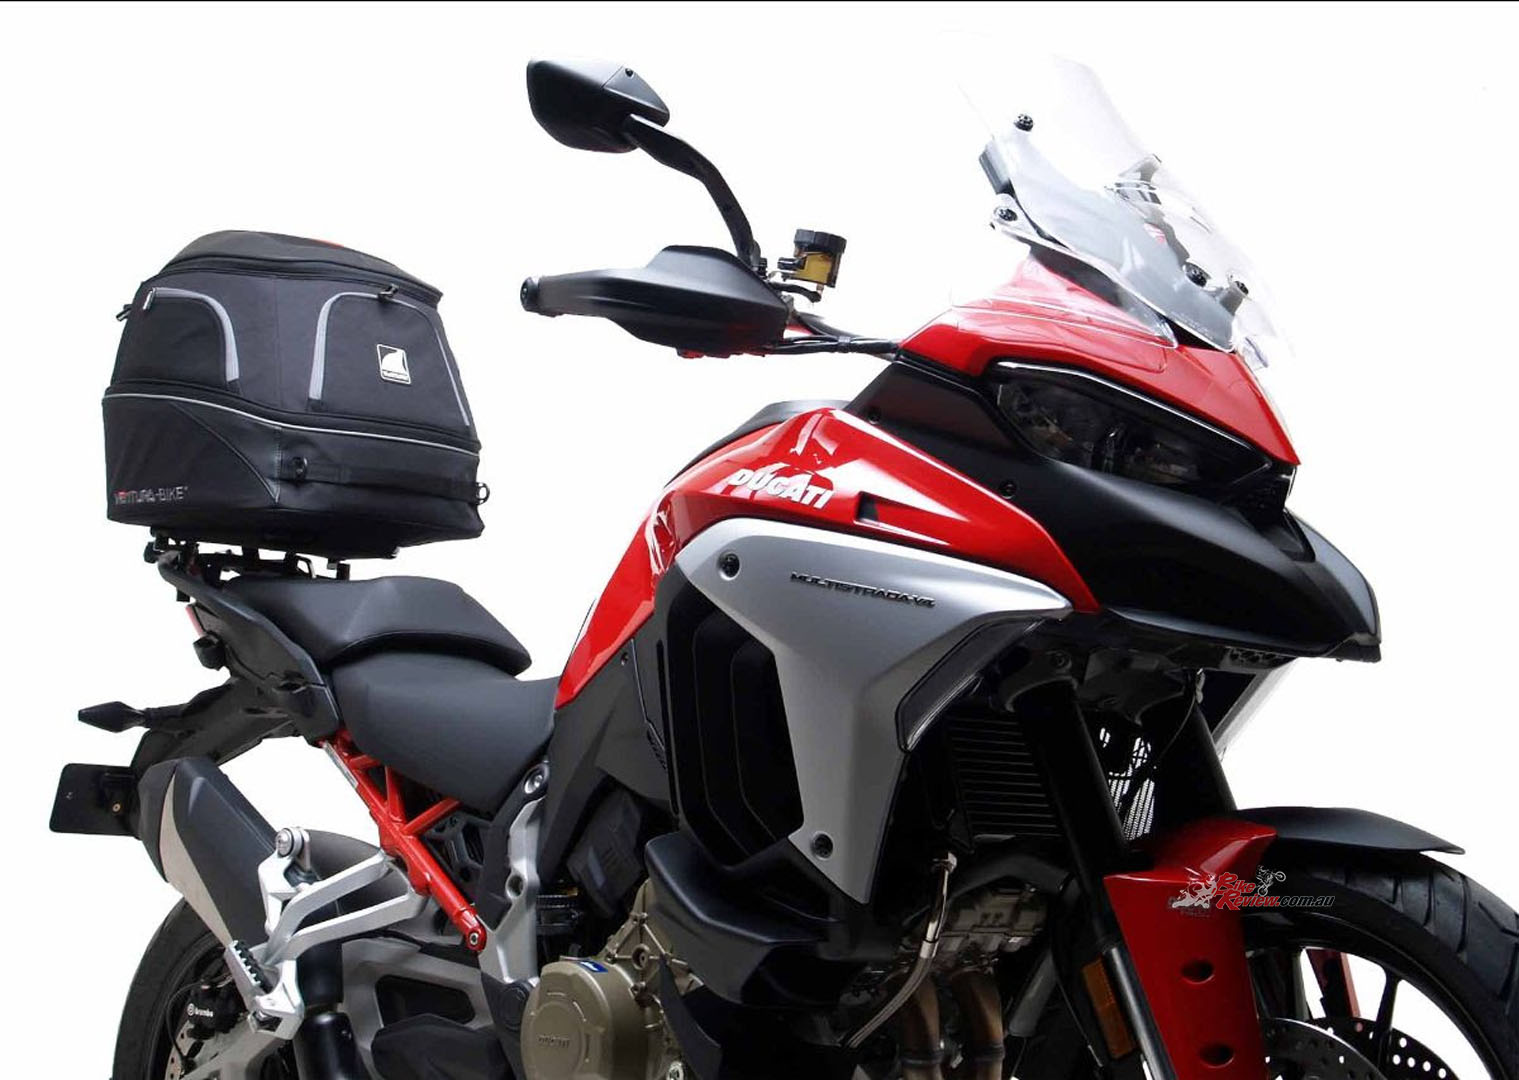 The Suzuki GSX1300R 2021 Hayabusa Gen III is seen here fitted with the EVO-60 Kit. Matching the lines perfectly.